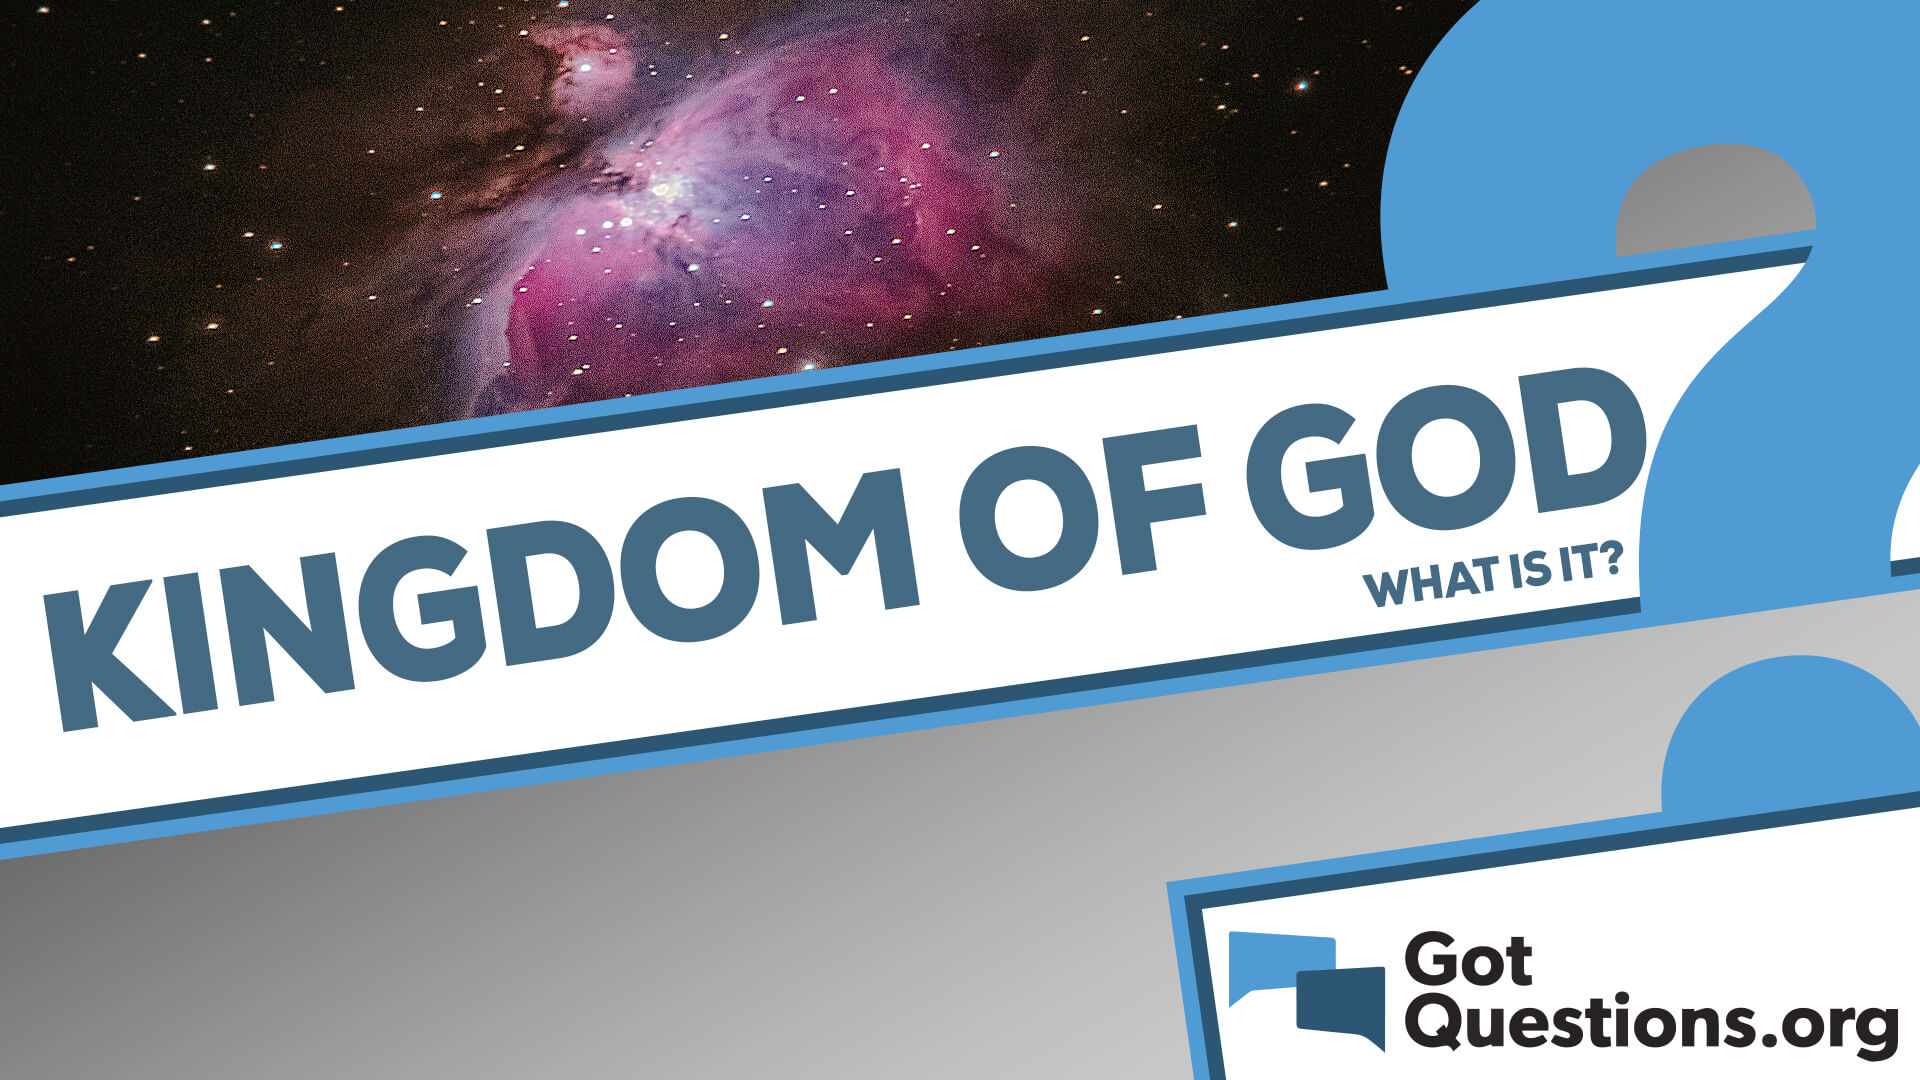 what is the kingdom of god?